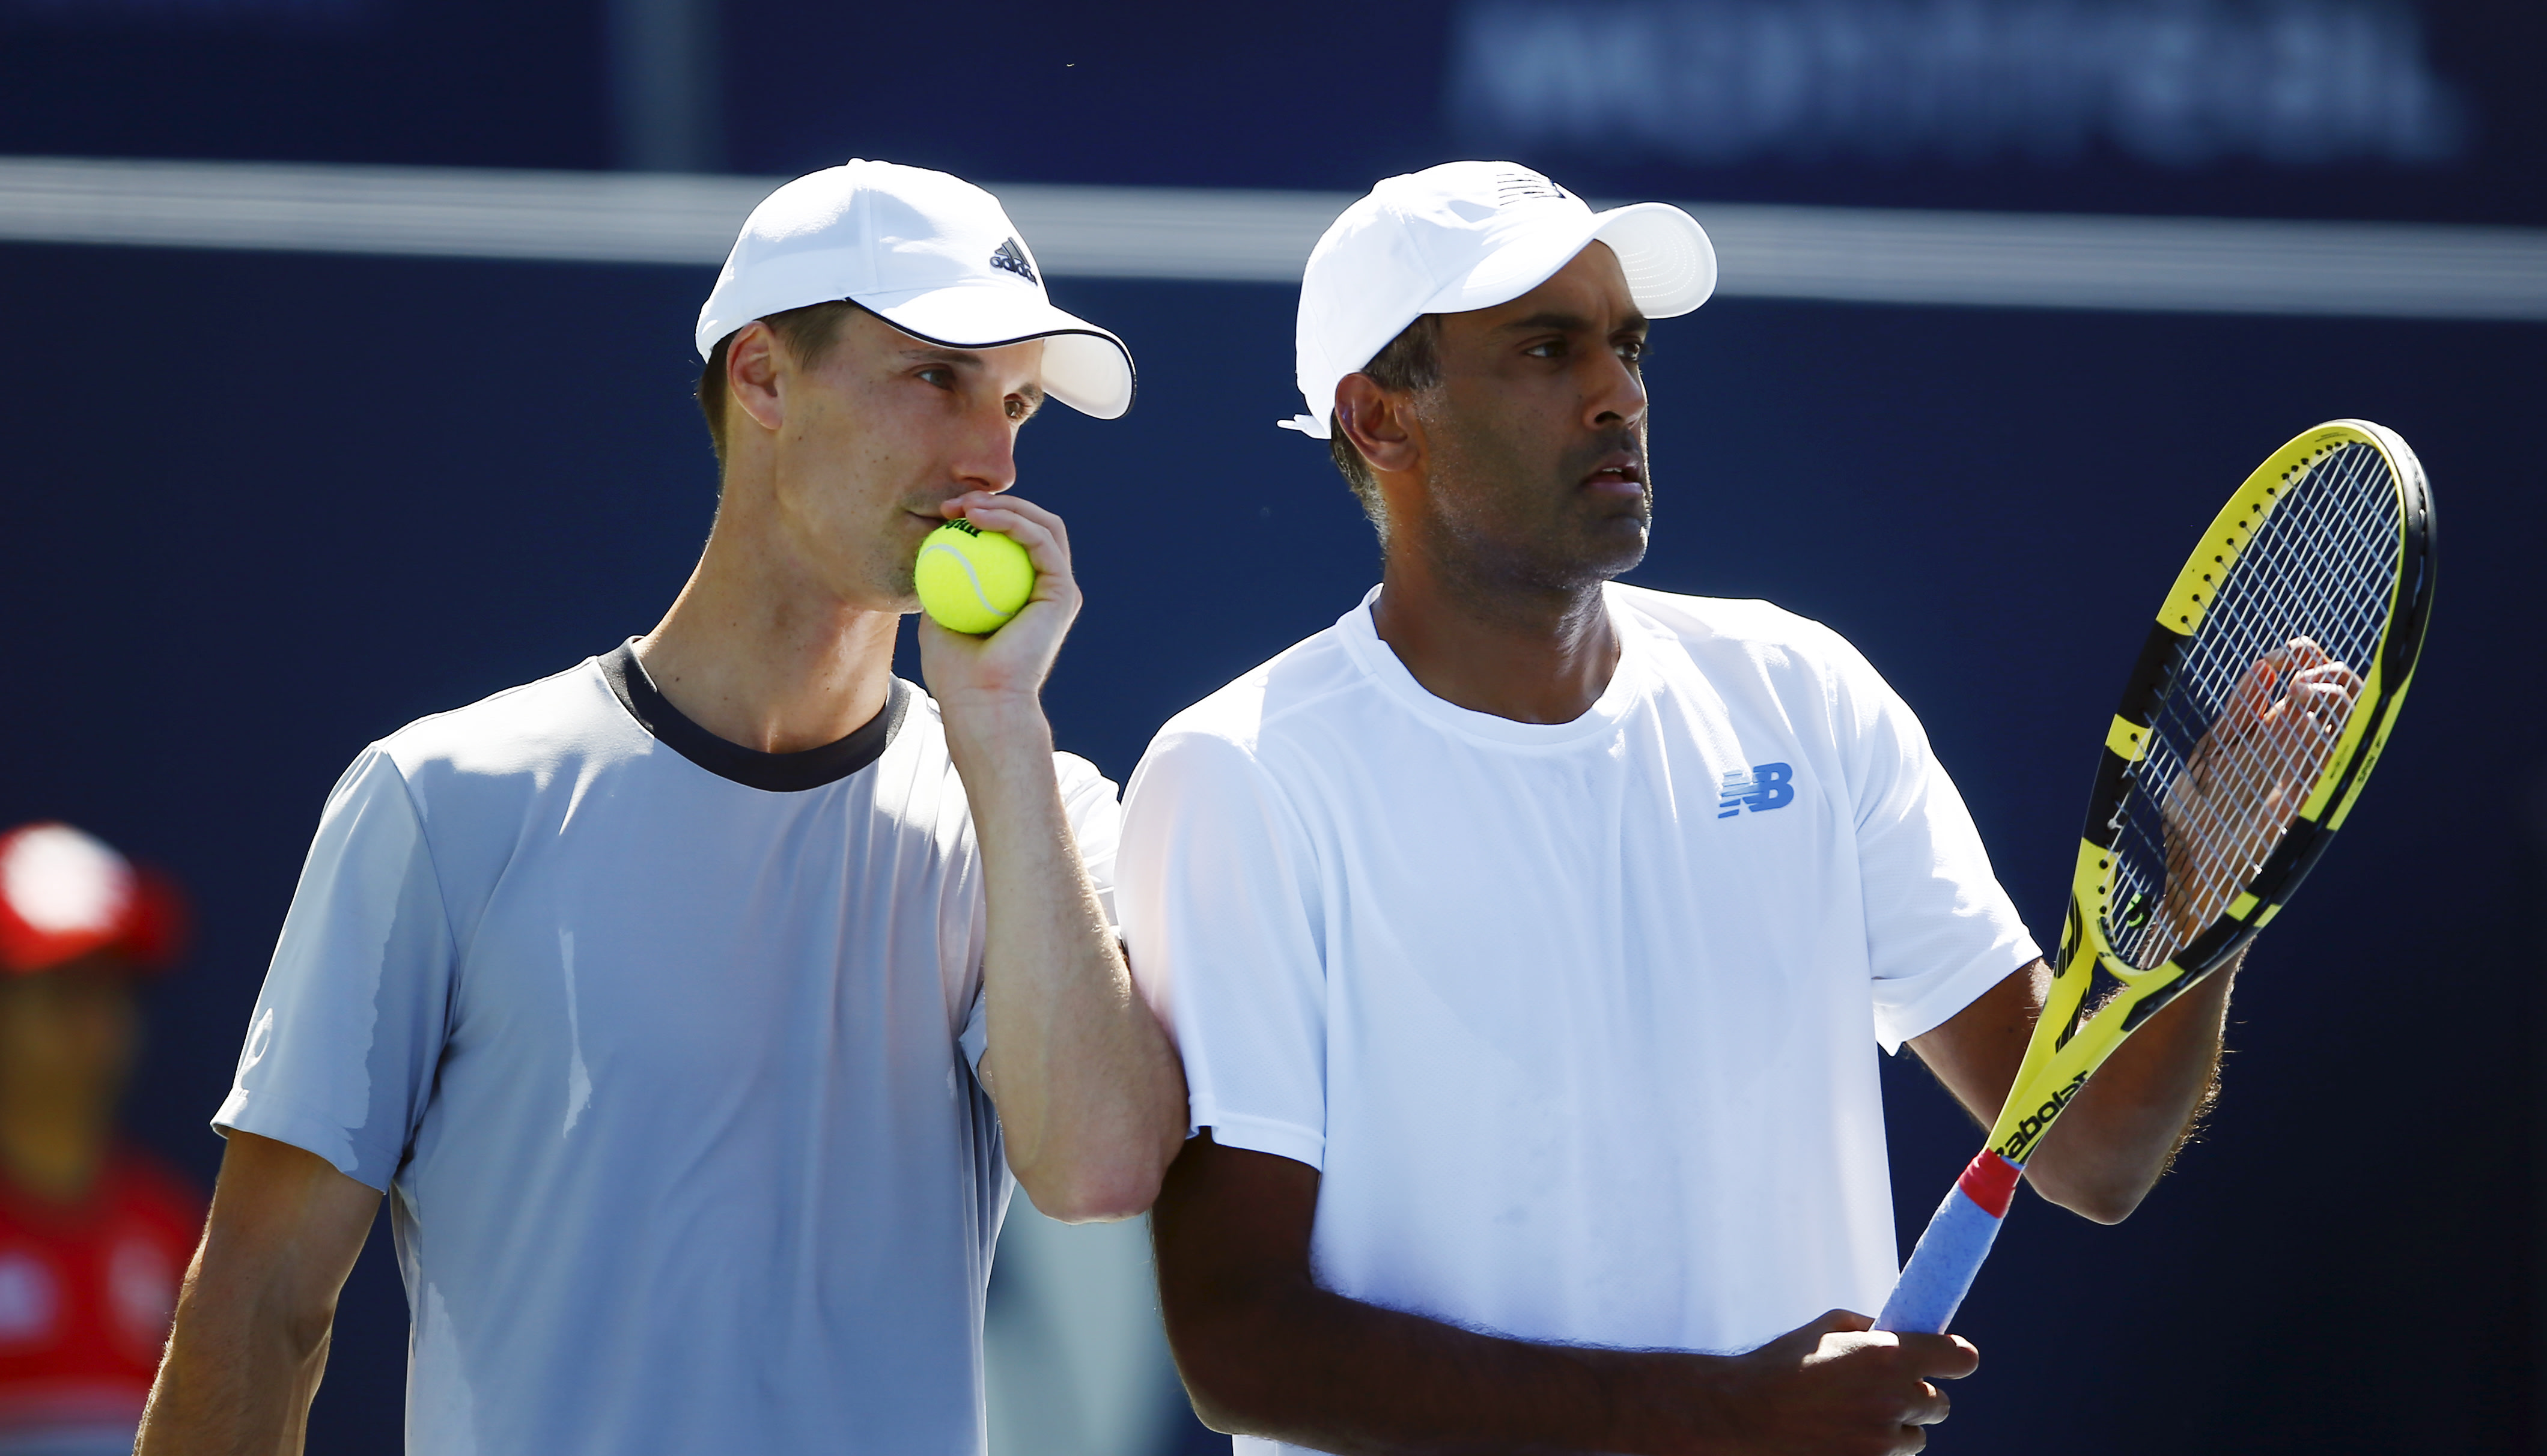 Doubles Take Rajeev Ram and Joe Salisbury capture first Masters 1000 event as a team